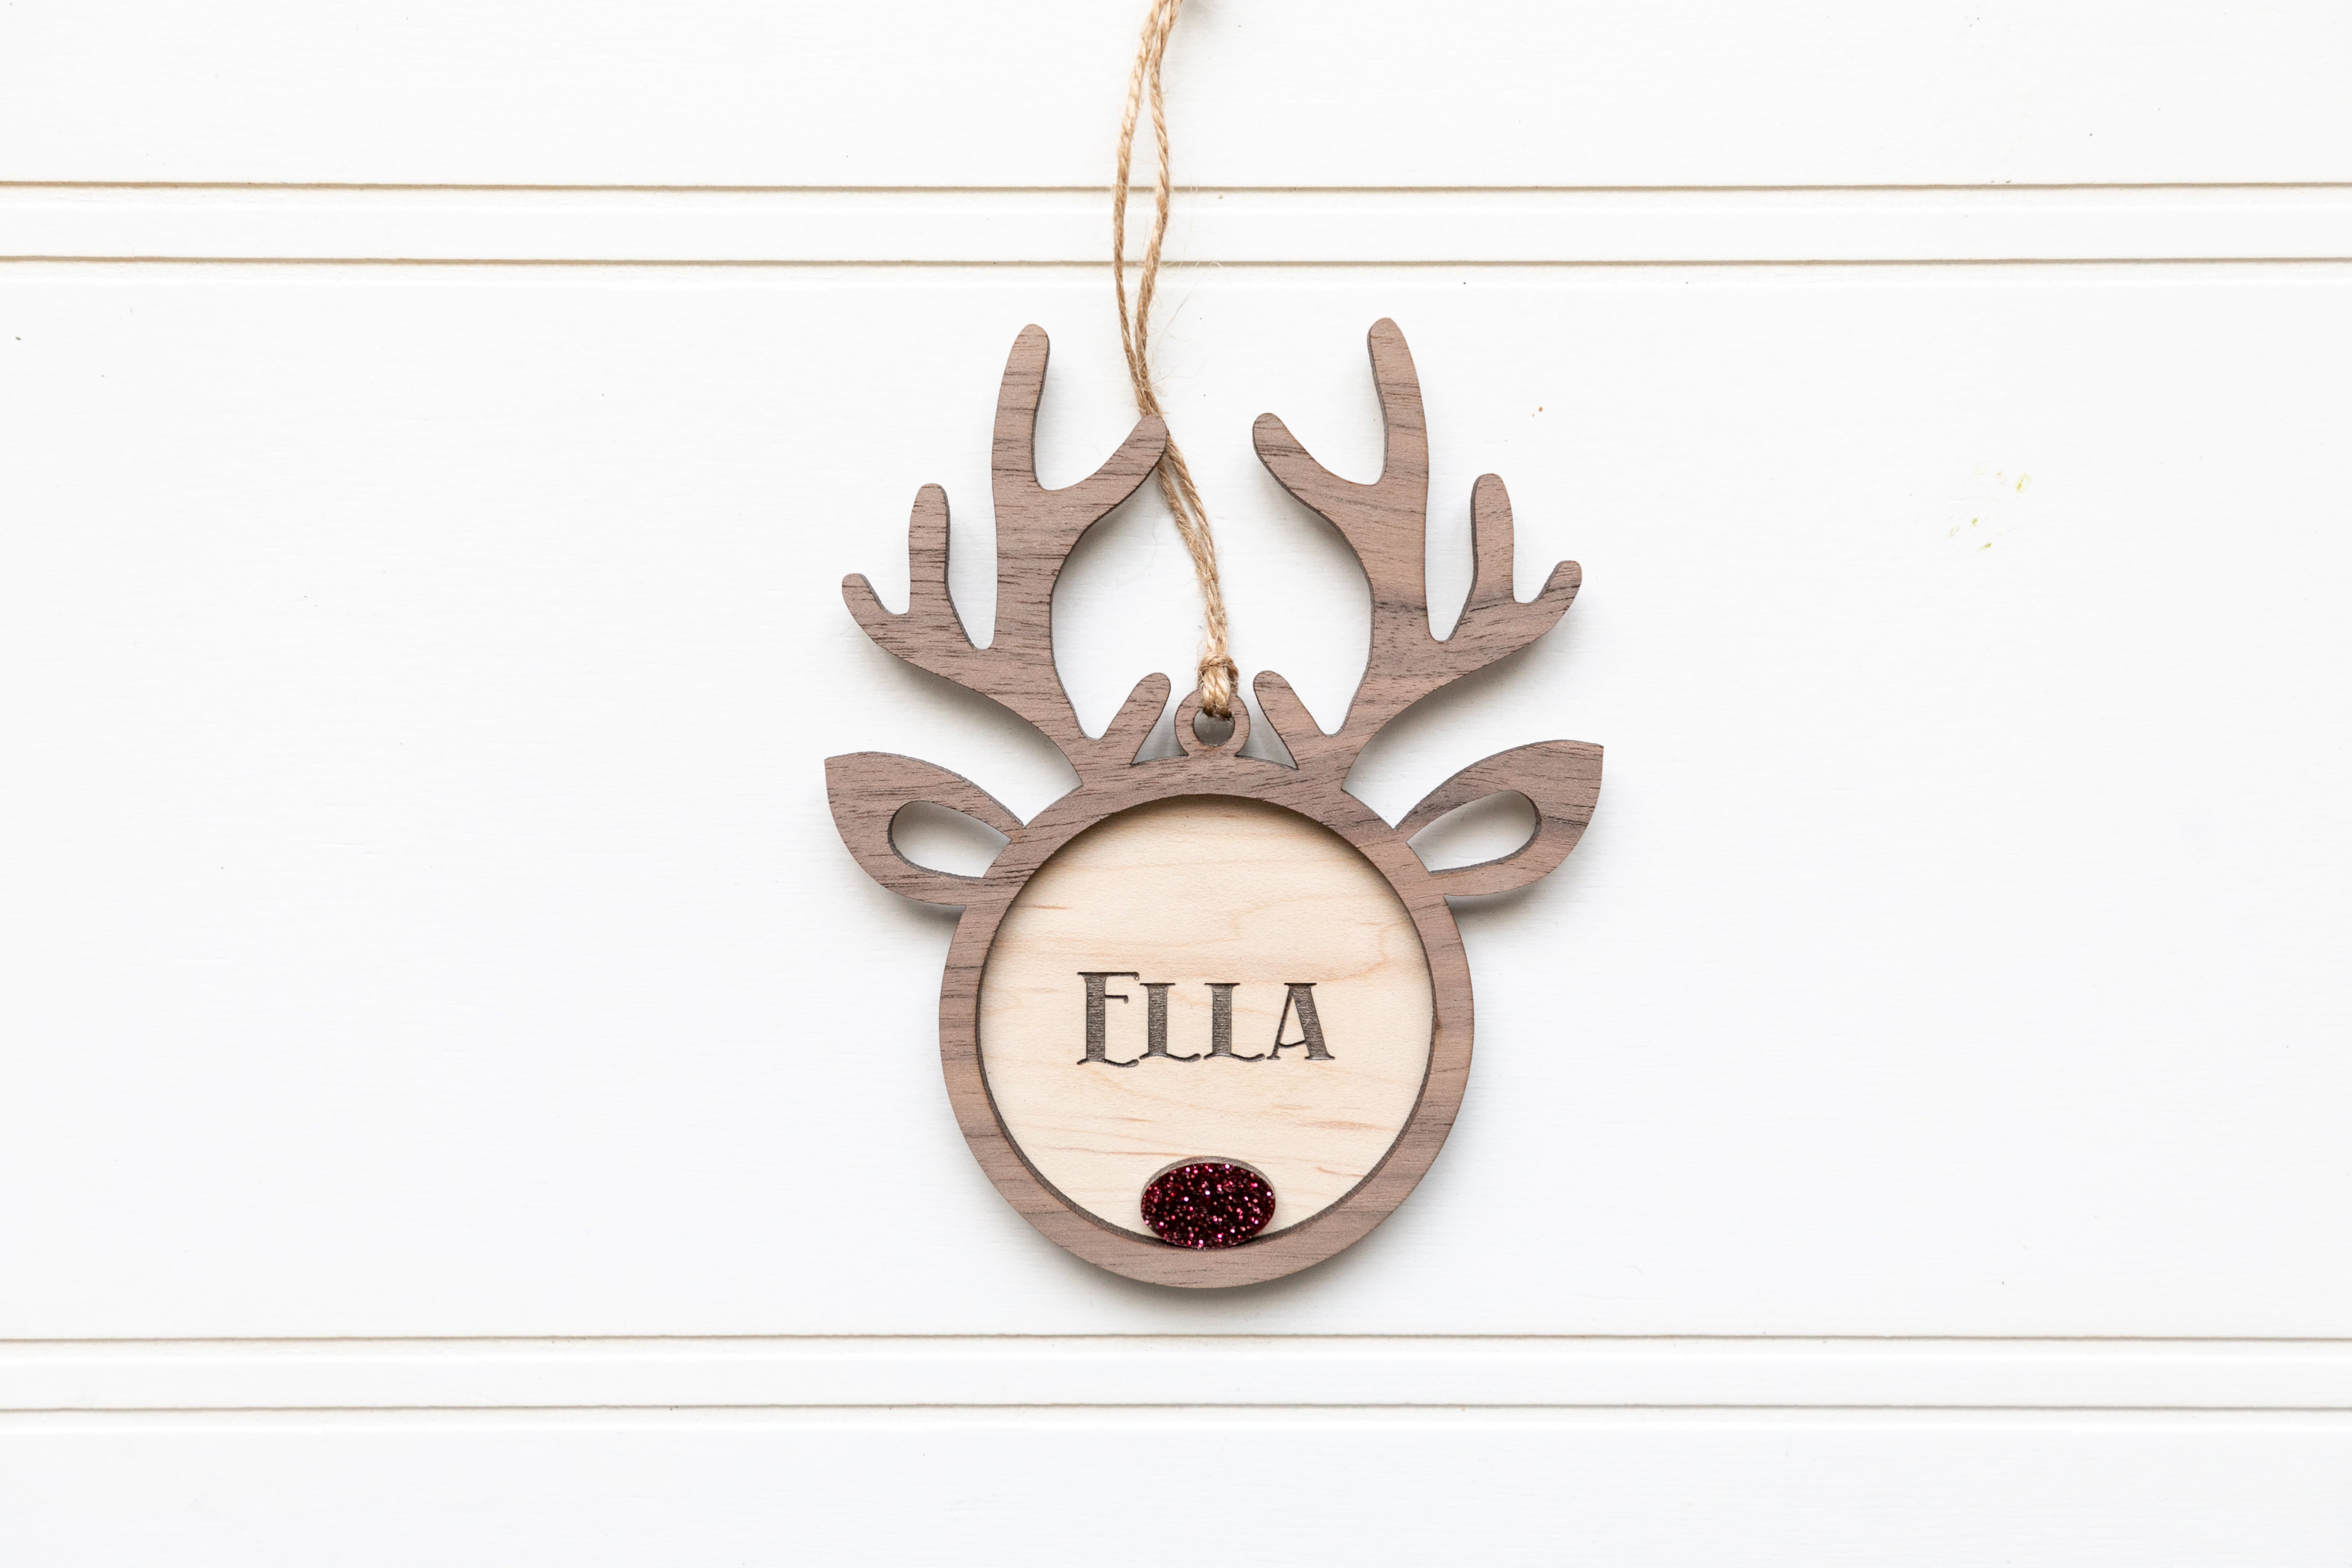 Personalized Reindeer Christmas Ornament